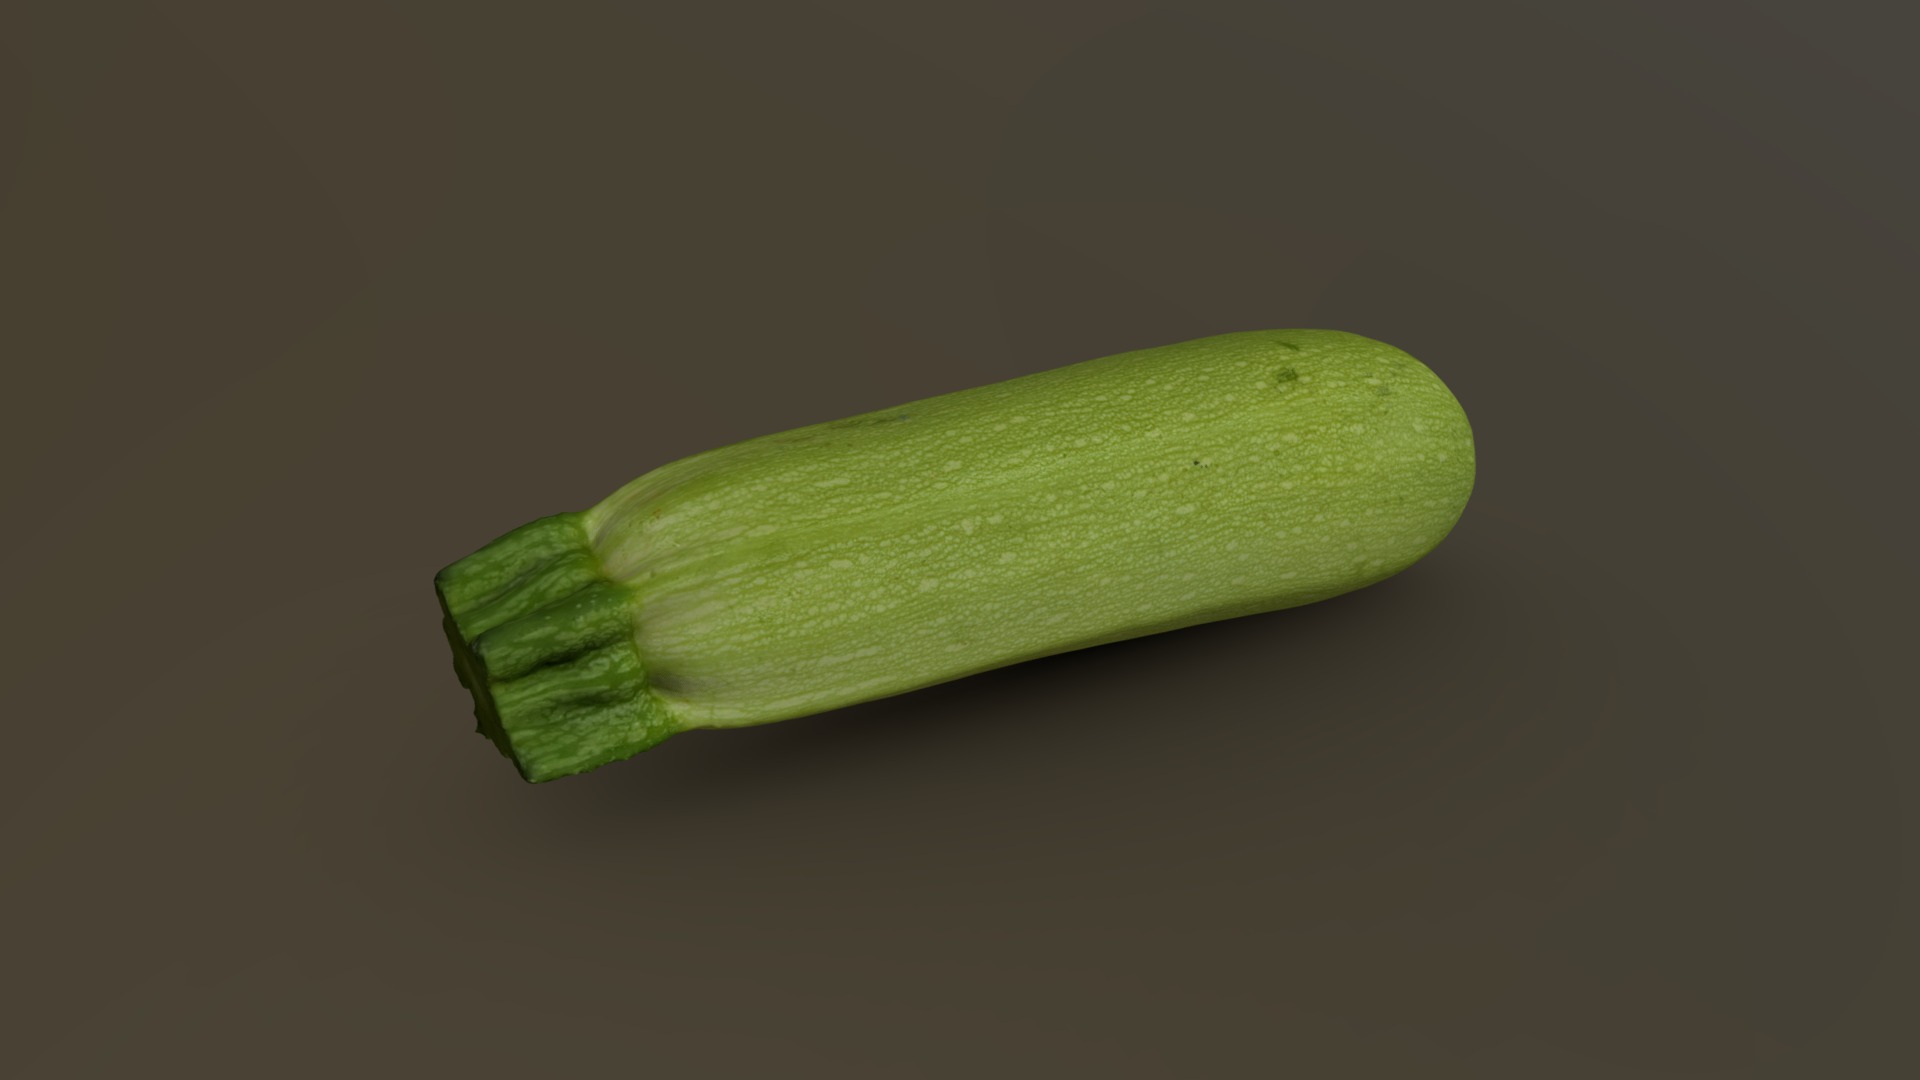 3D model Zucchini 01 - This is a 3D model of the Zucchini 01. The 3D model is about a green vegetable on a black surface.